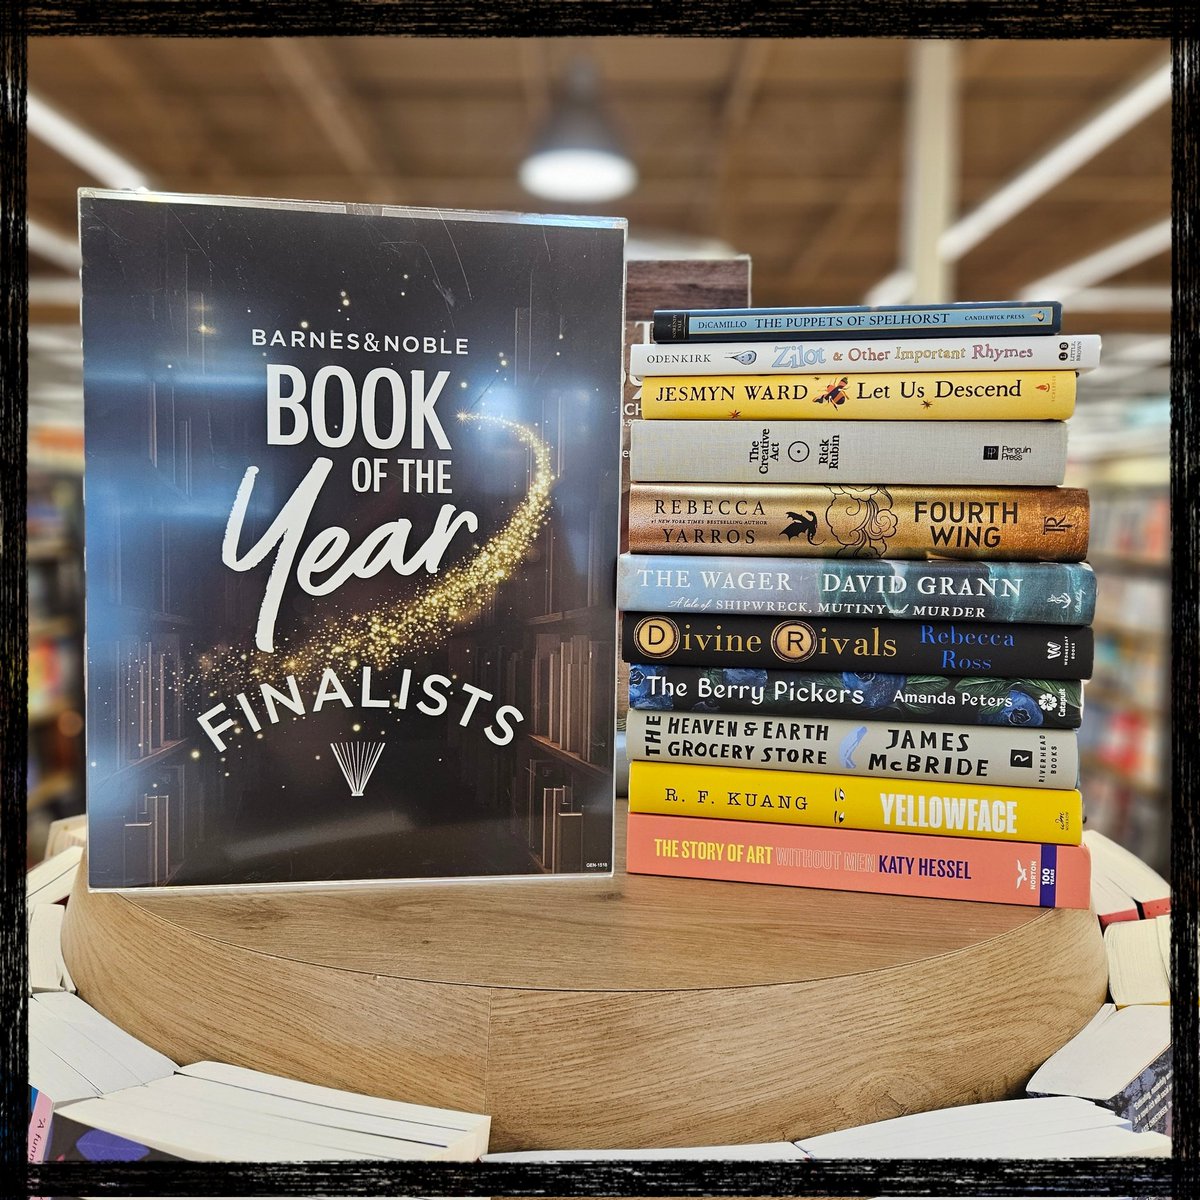 When it comes to selecting the best reads of the year, the finalists for Barnes & Noble Book of the Year certainly don't disappoint! These top-notch literary gems are waiting to be discovered. Which one will you read first? *Chili Crisp by James Park not featured in photo